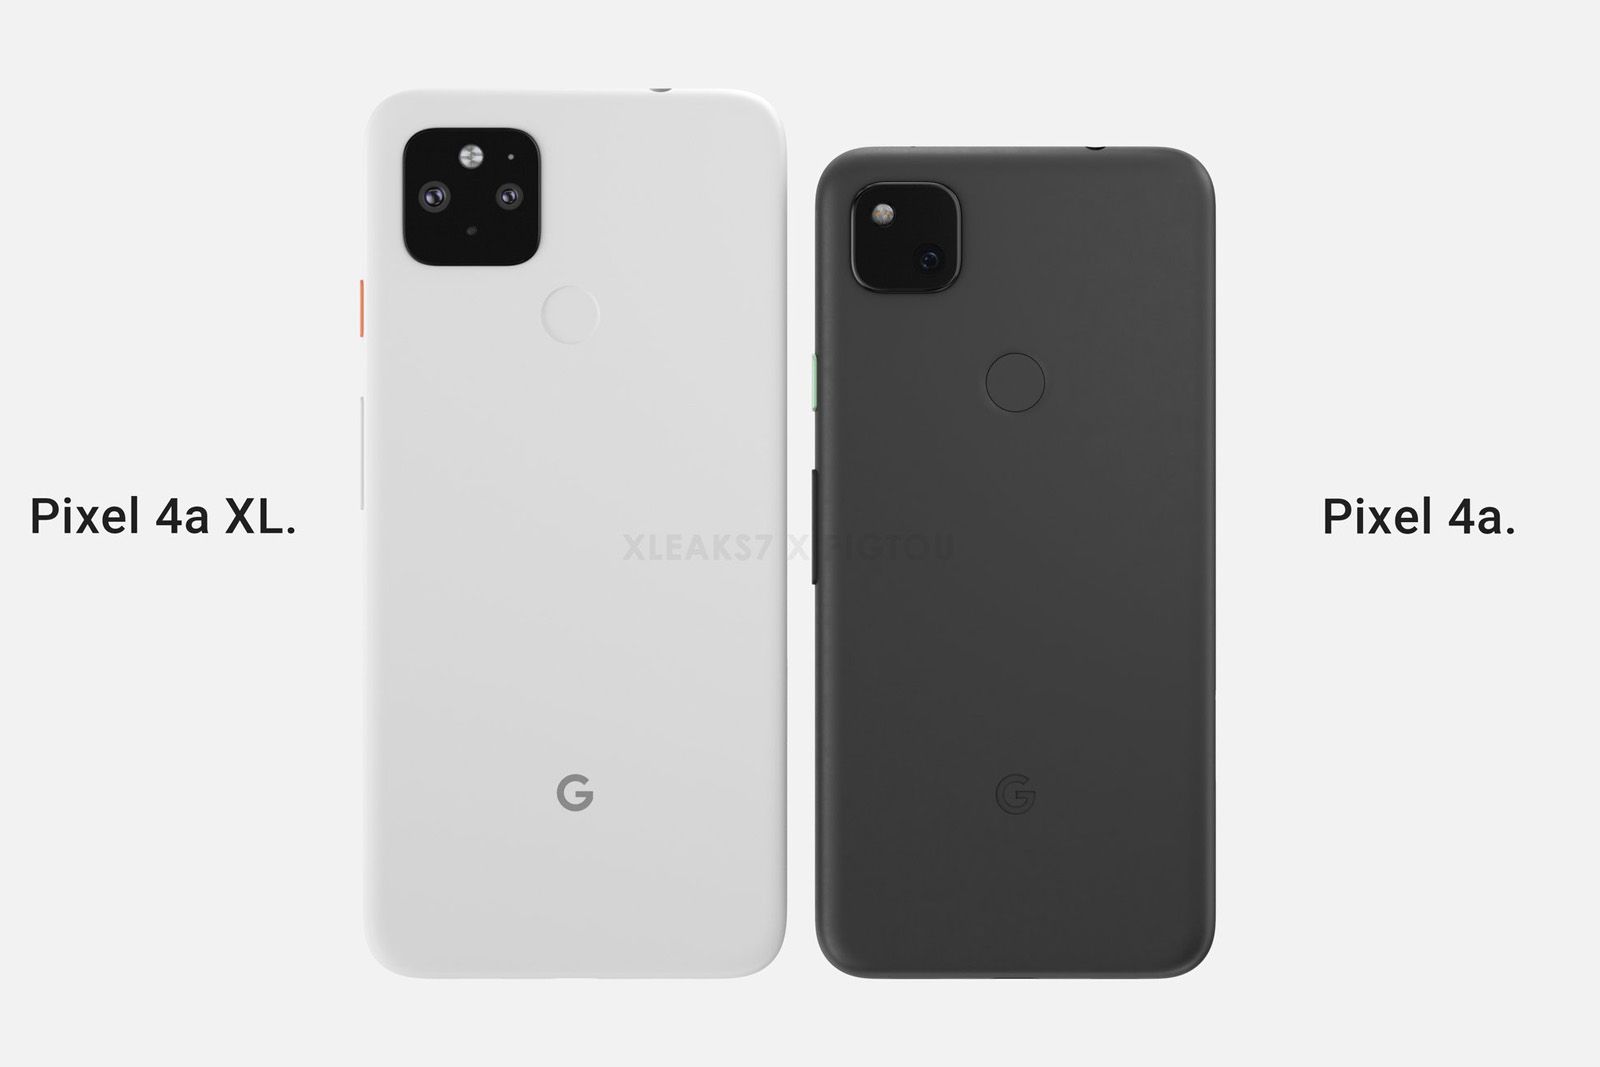 This is what the Pixel 4a XL would look like if it launched image 3